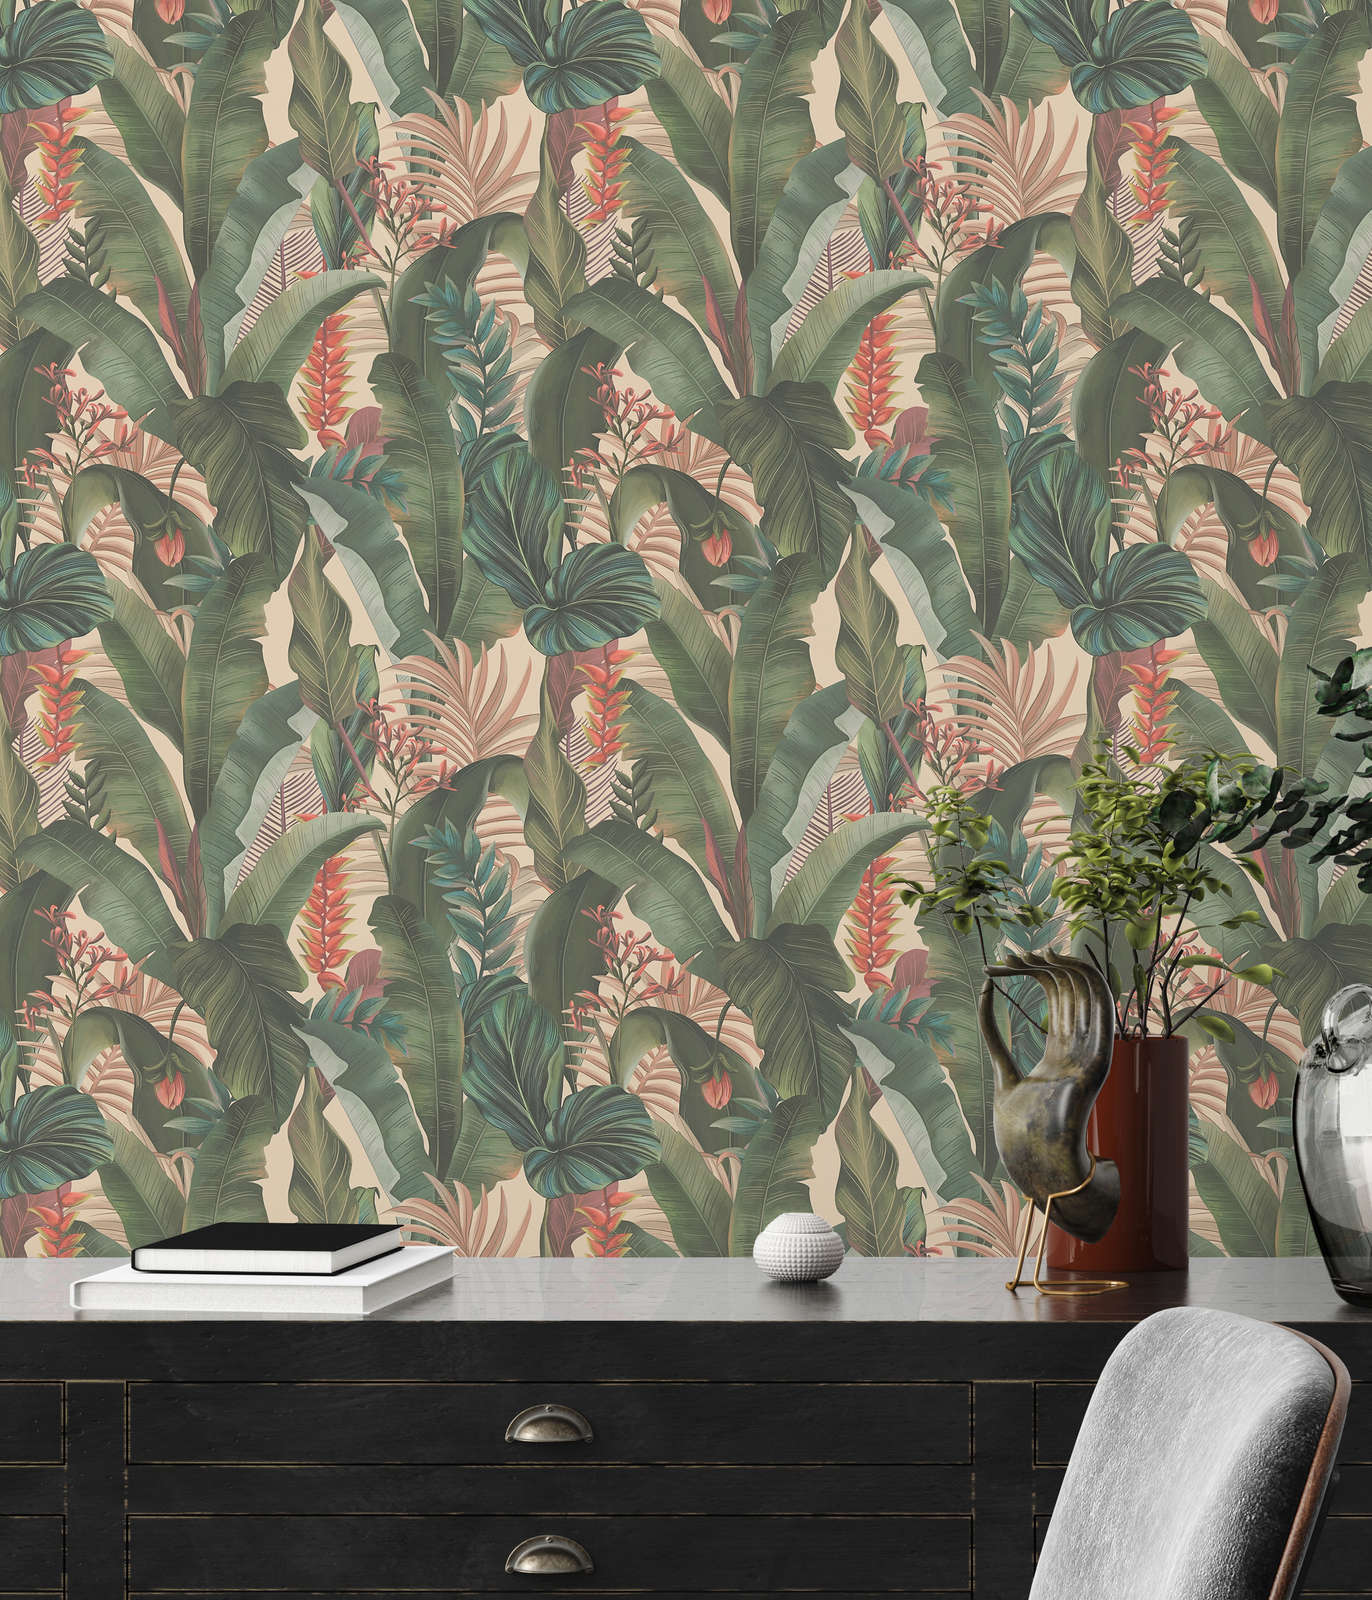             Jungle wallpaper with palm leaves & flowers in floral style textured matt - Beige, Green, Pink
        